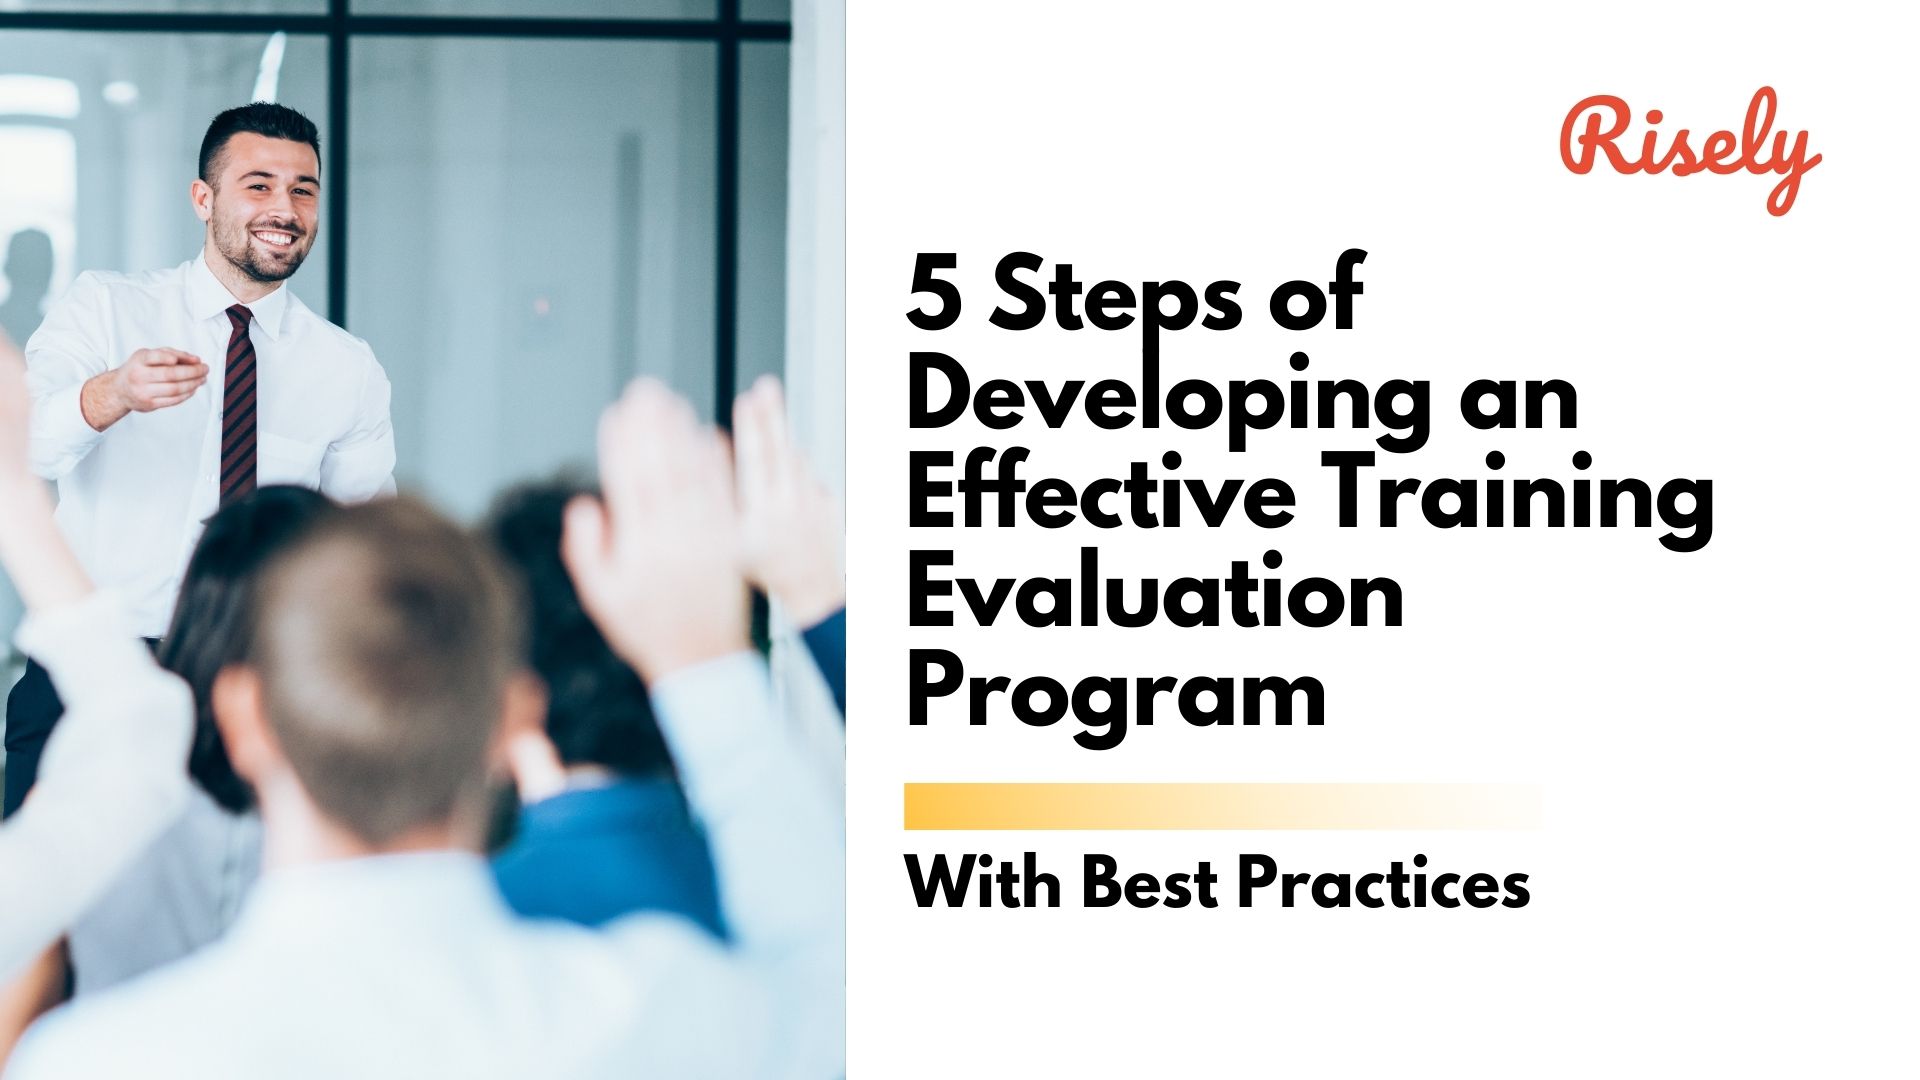 5 Steps of Developing an Effective Training Evaluation Program